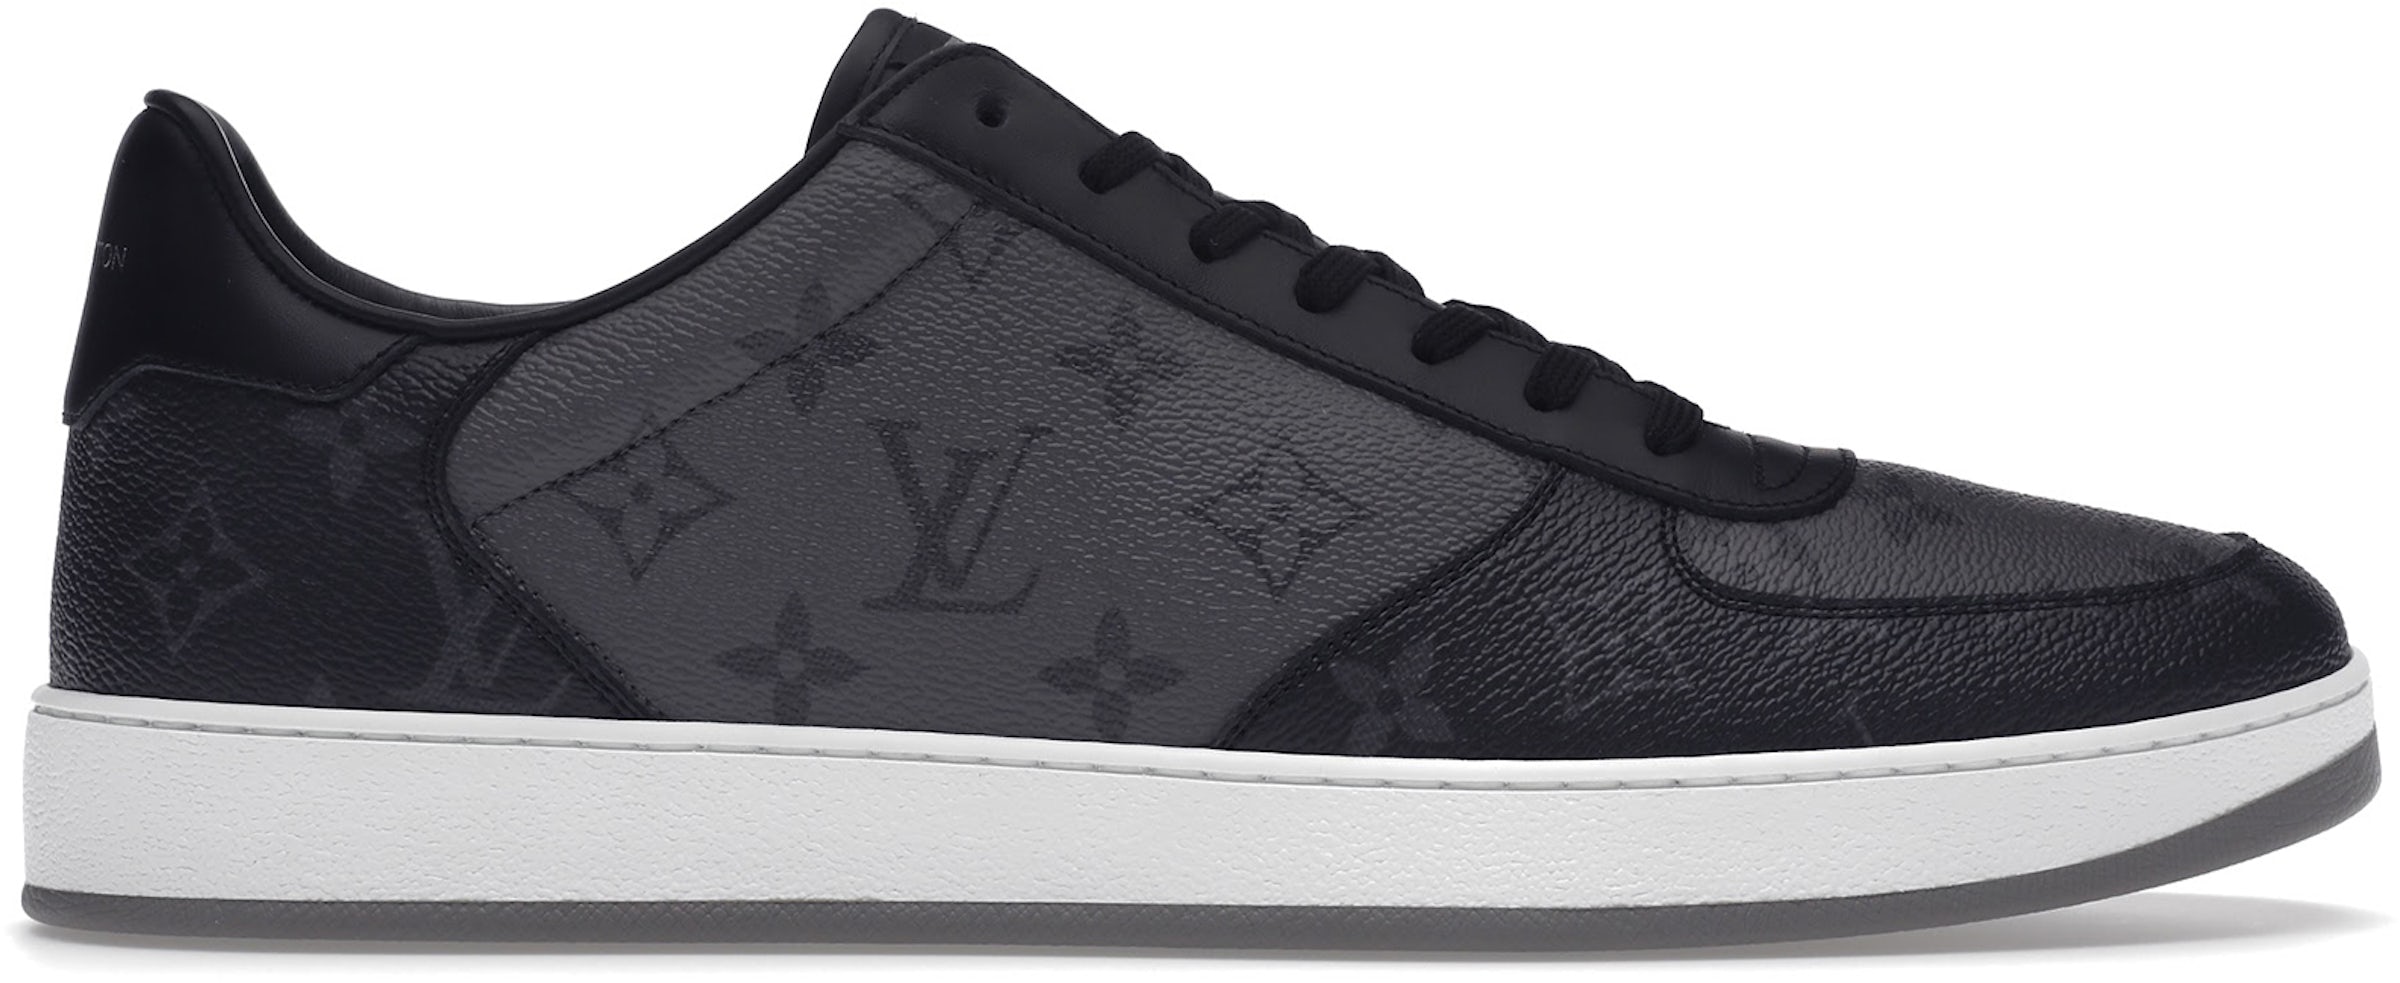 Buy Louis Vuitton Shoes and Sneakers - StockX